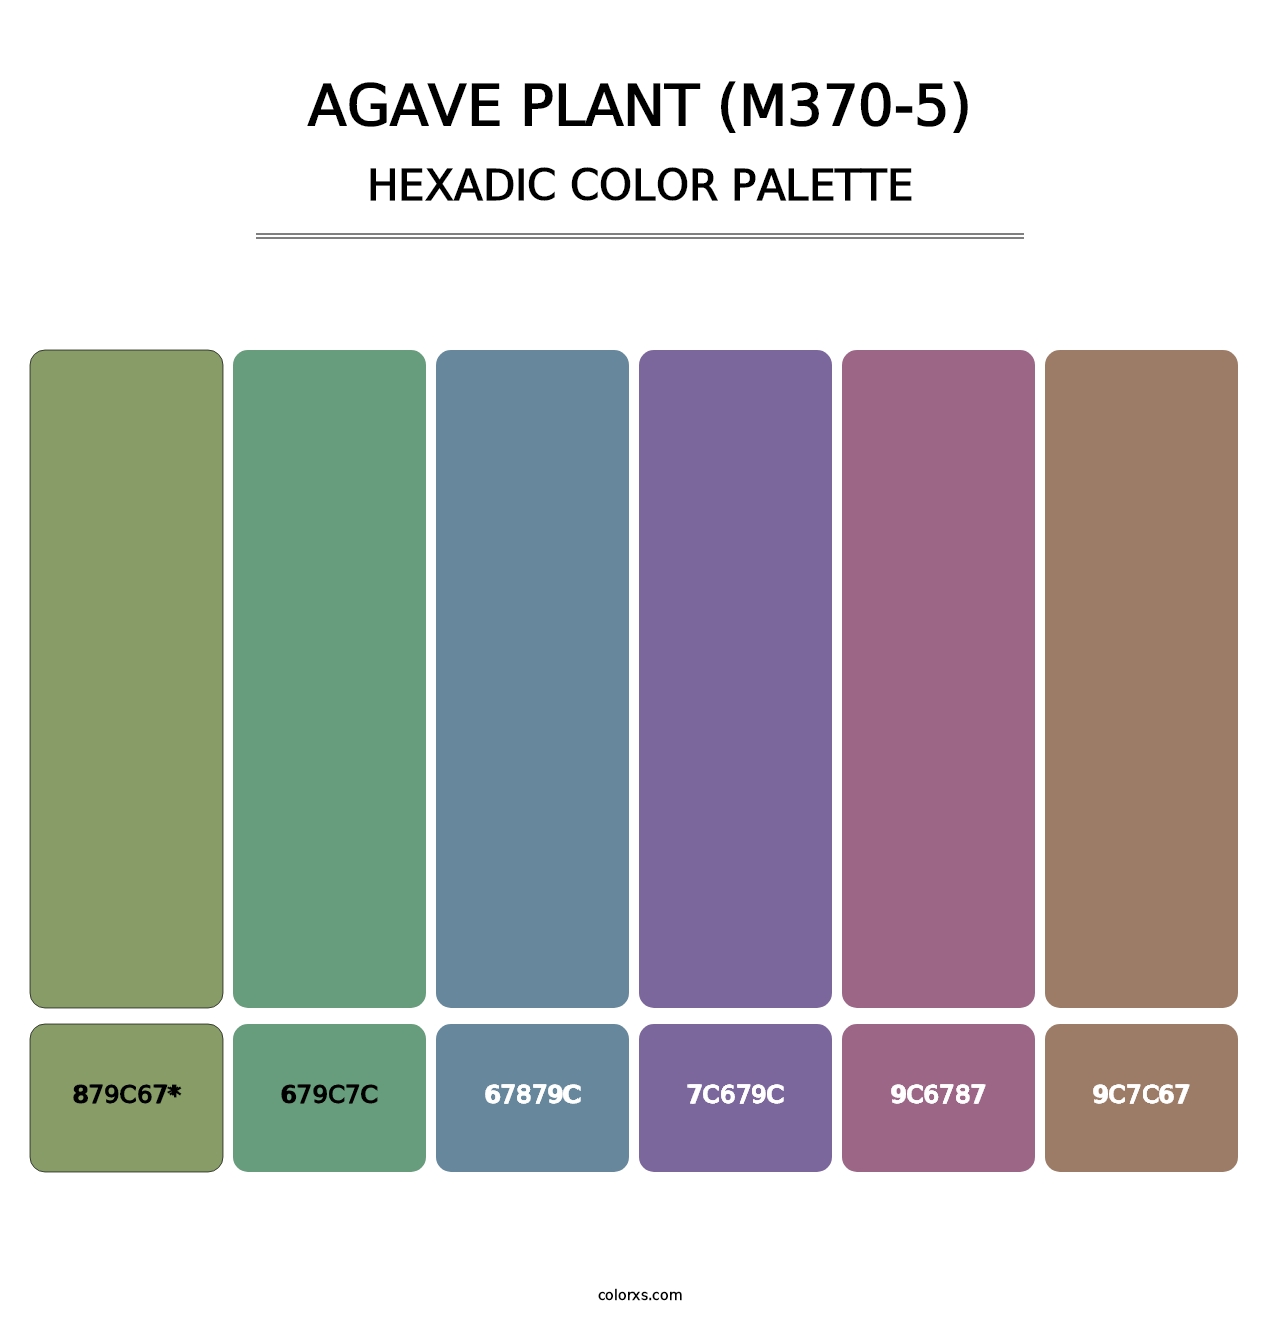 Agave Plant (M370-5) - Hexadic Color Palette